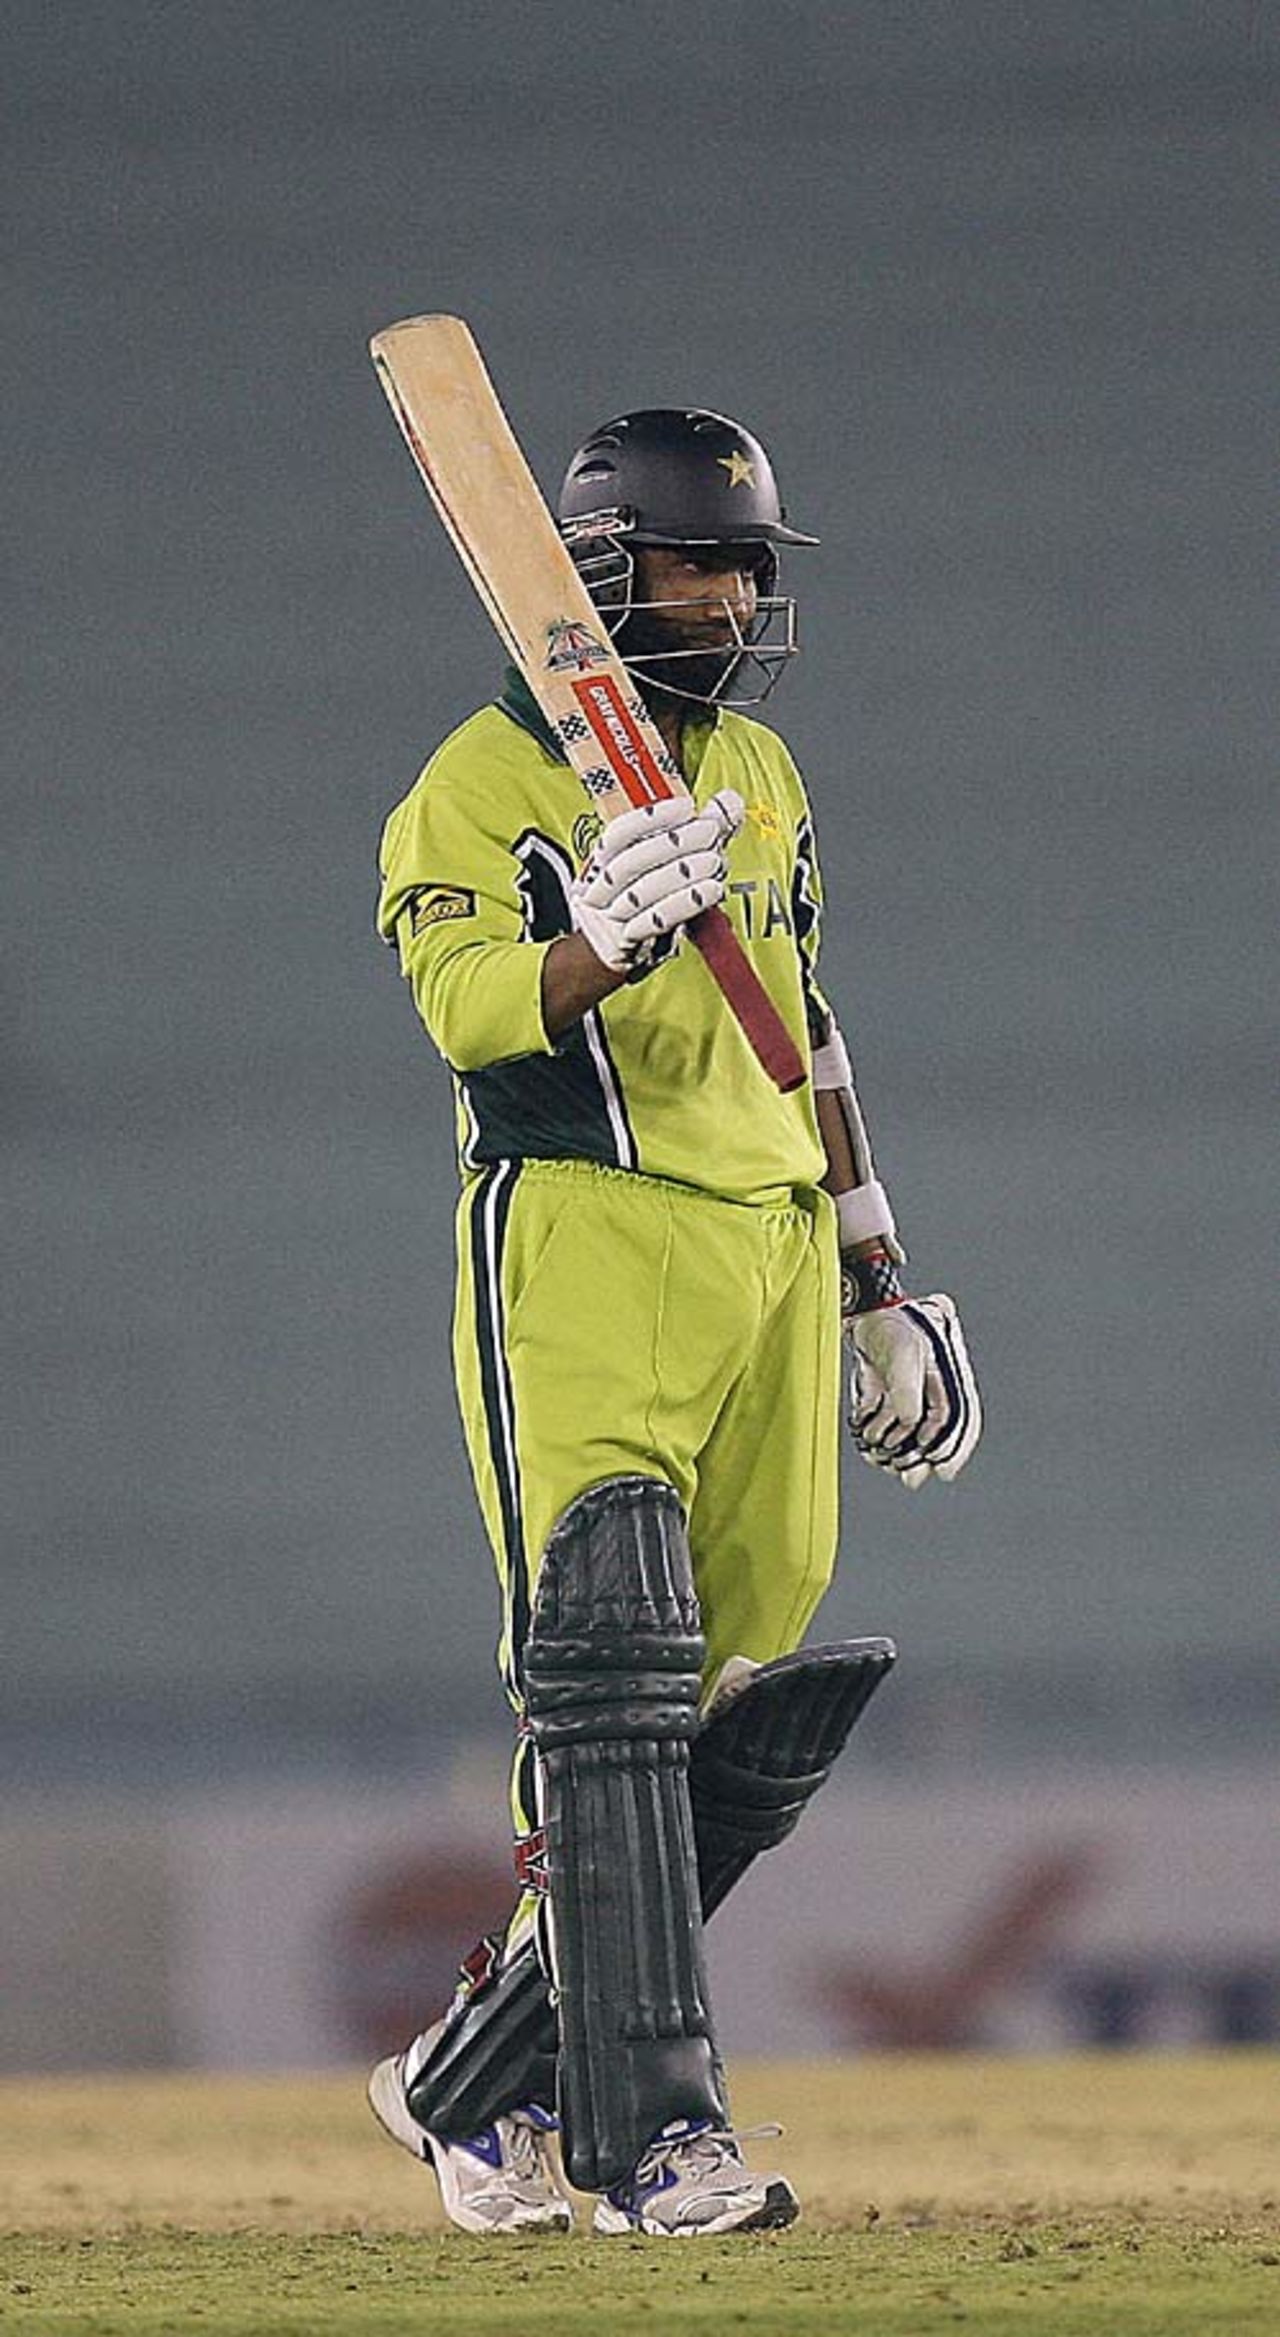 Mohammad Yousuf celebrates his fifty, New Zealand v Pakistan, 8th match, Mohali, Champions Trophy, October 25, 2006